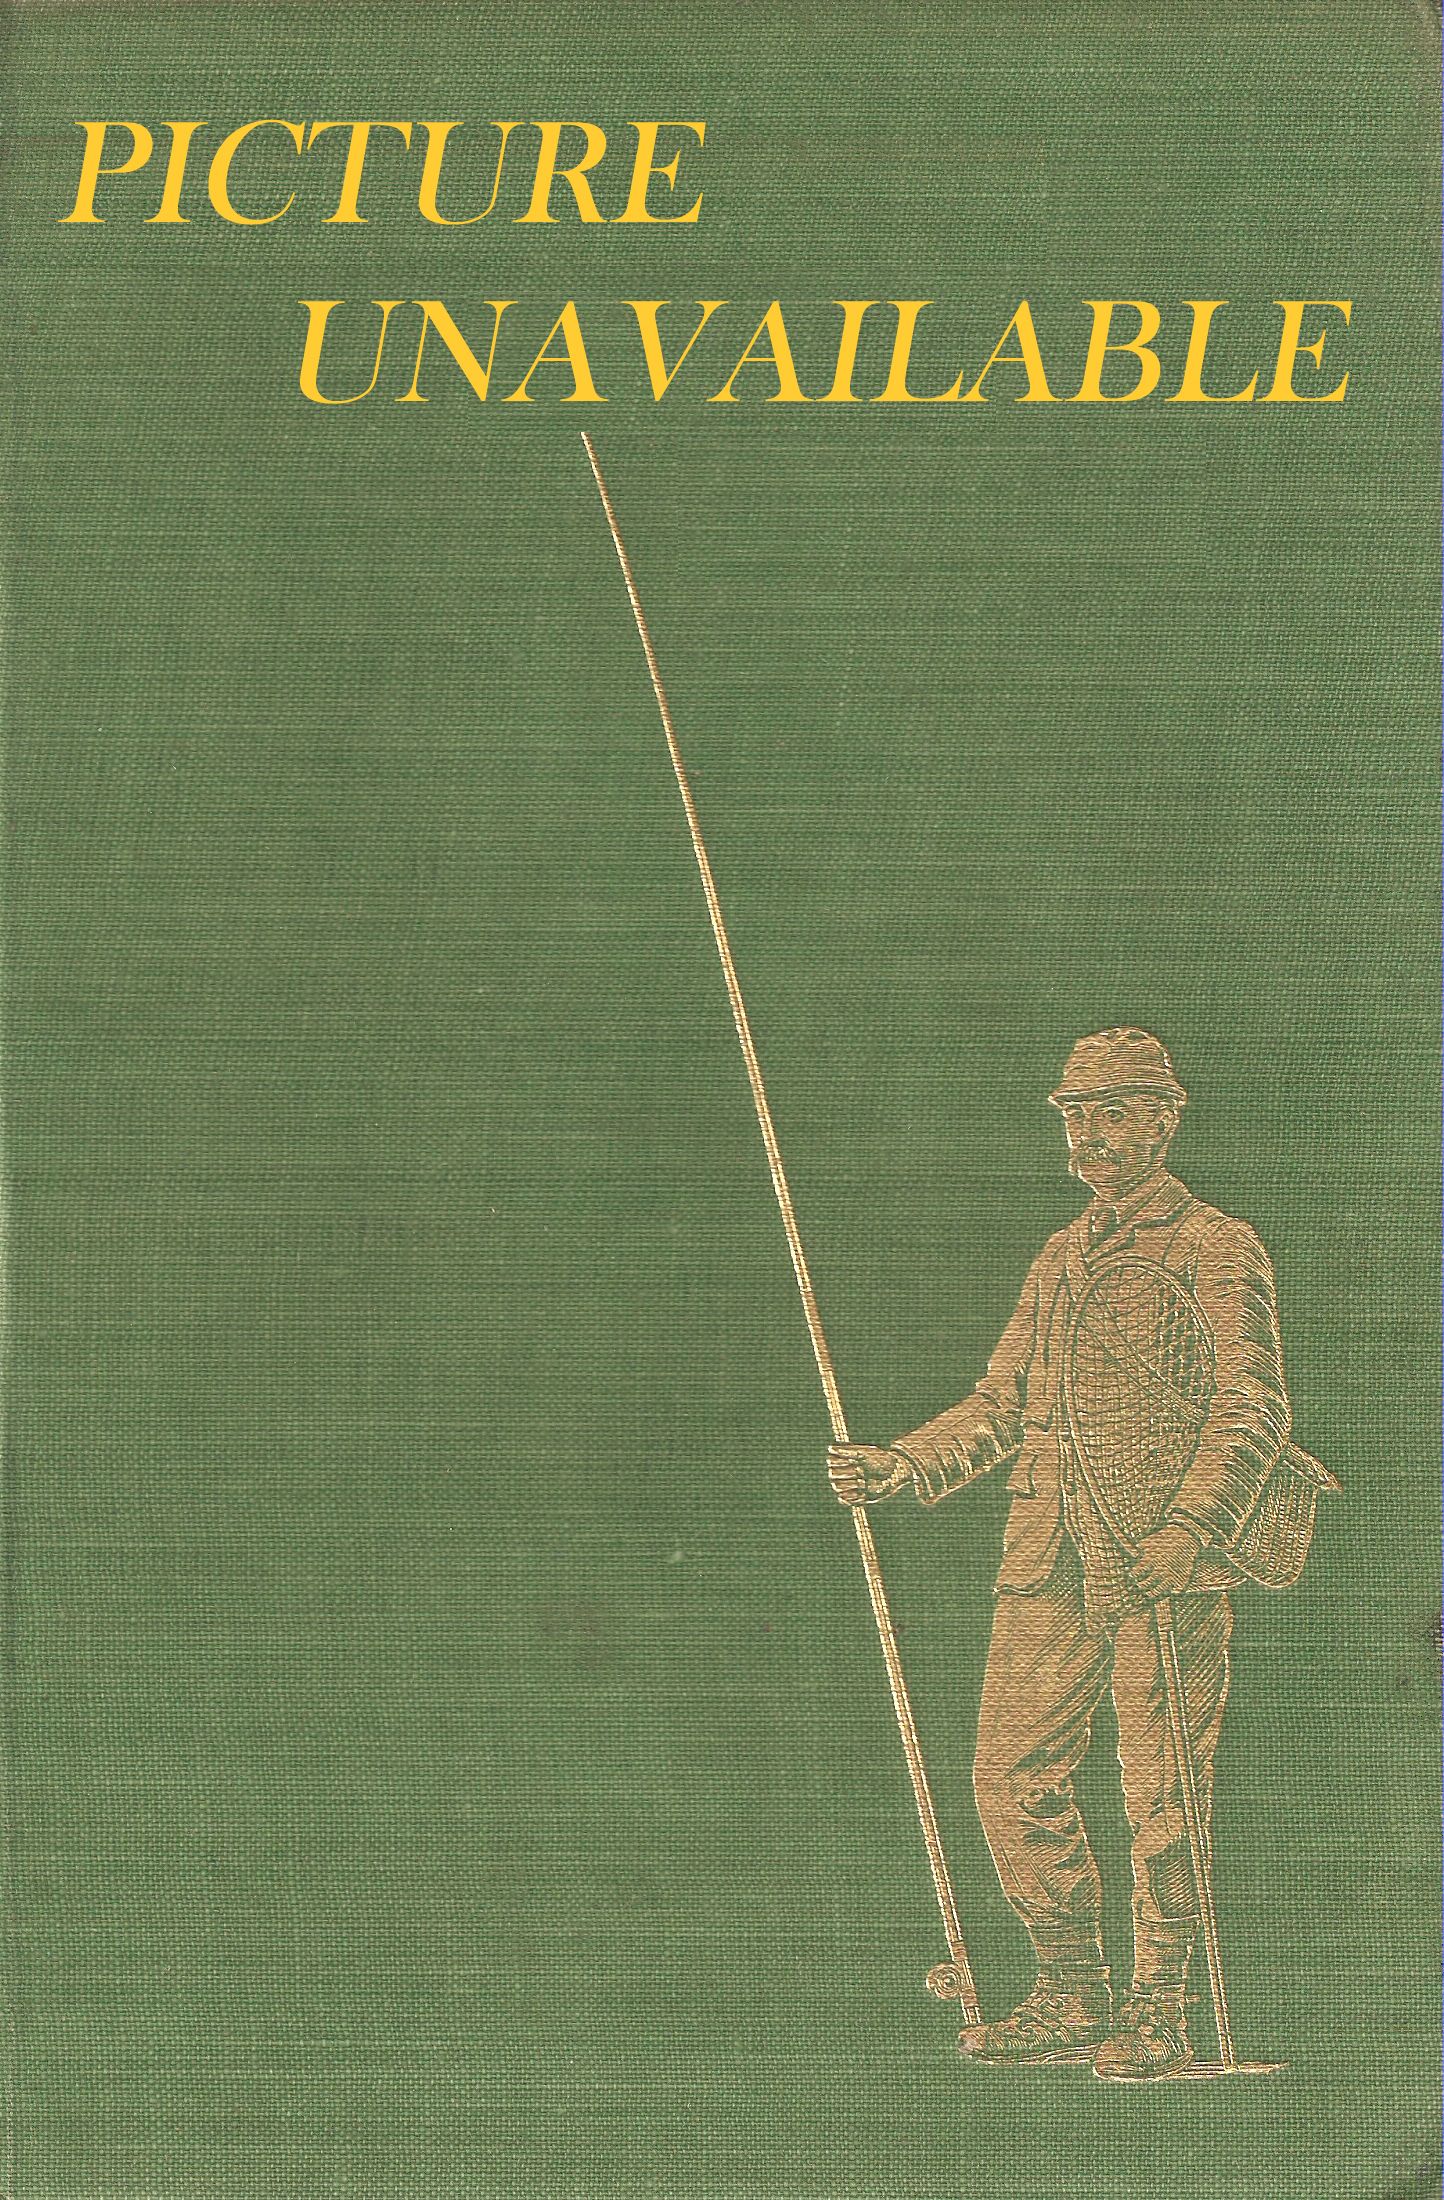 SEA ANGLING AROUND CORNWALL. By D.A. Weaver, N.L. Parish and M.J. Weaver.